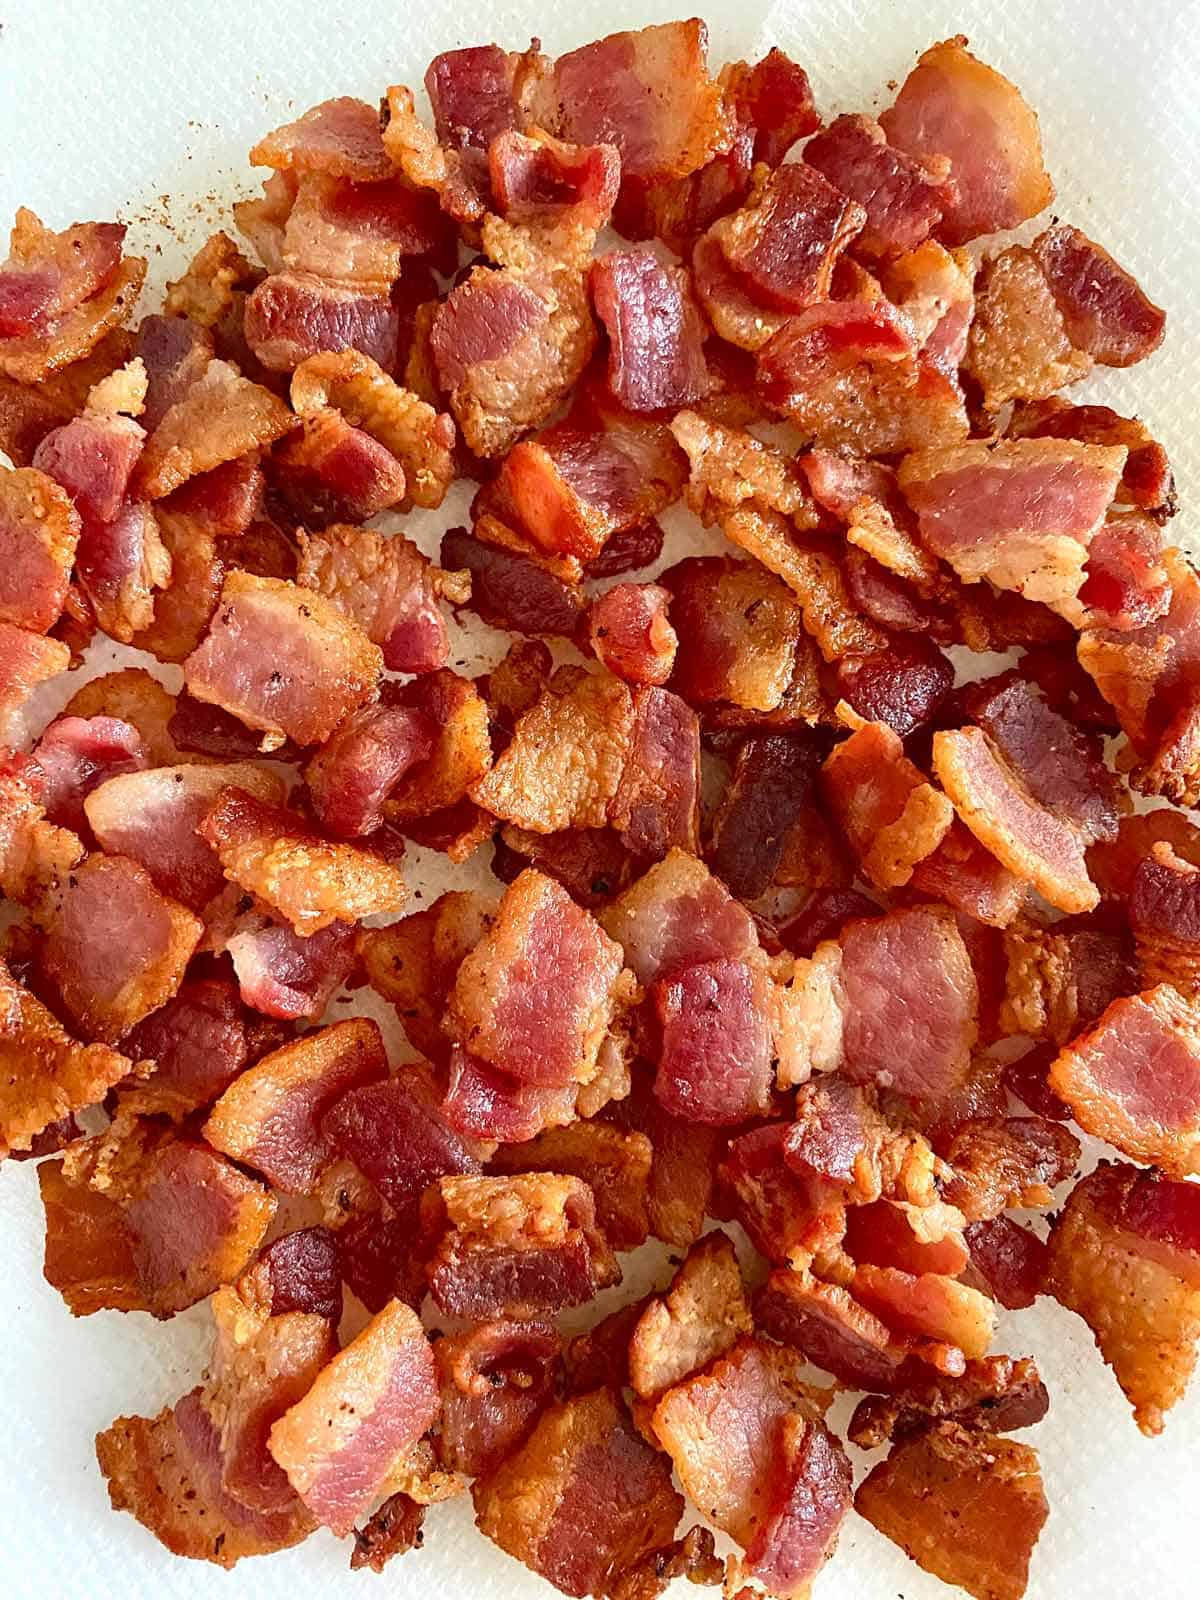 Cooked chopped bacon pieces draining on a paper towel.